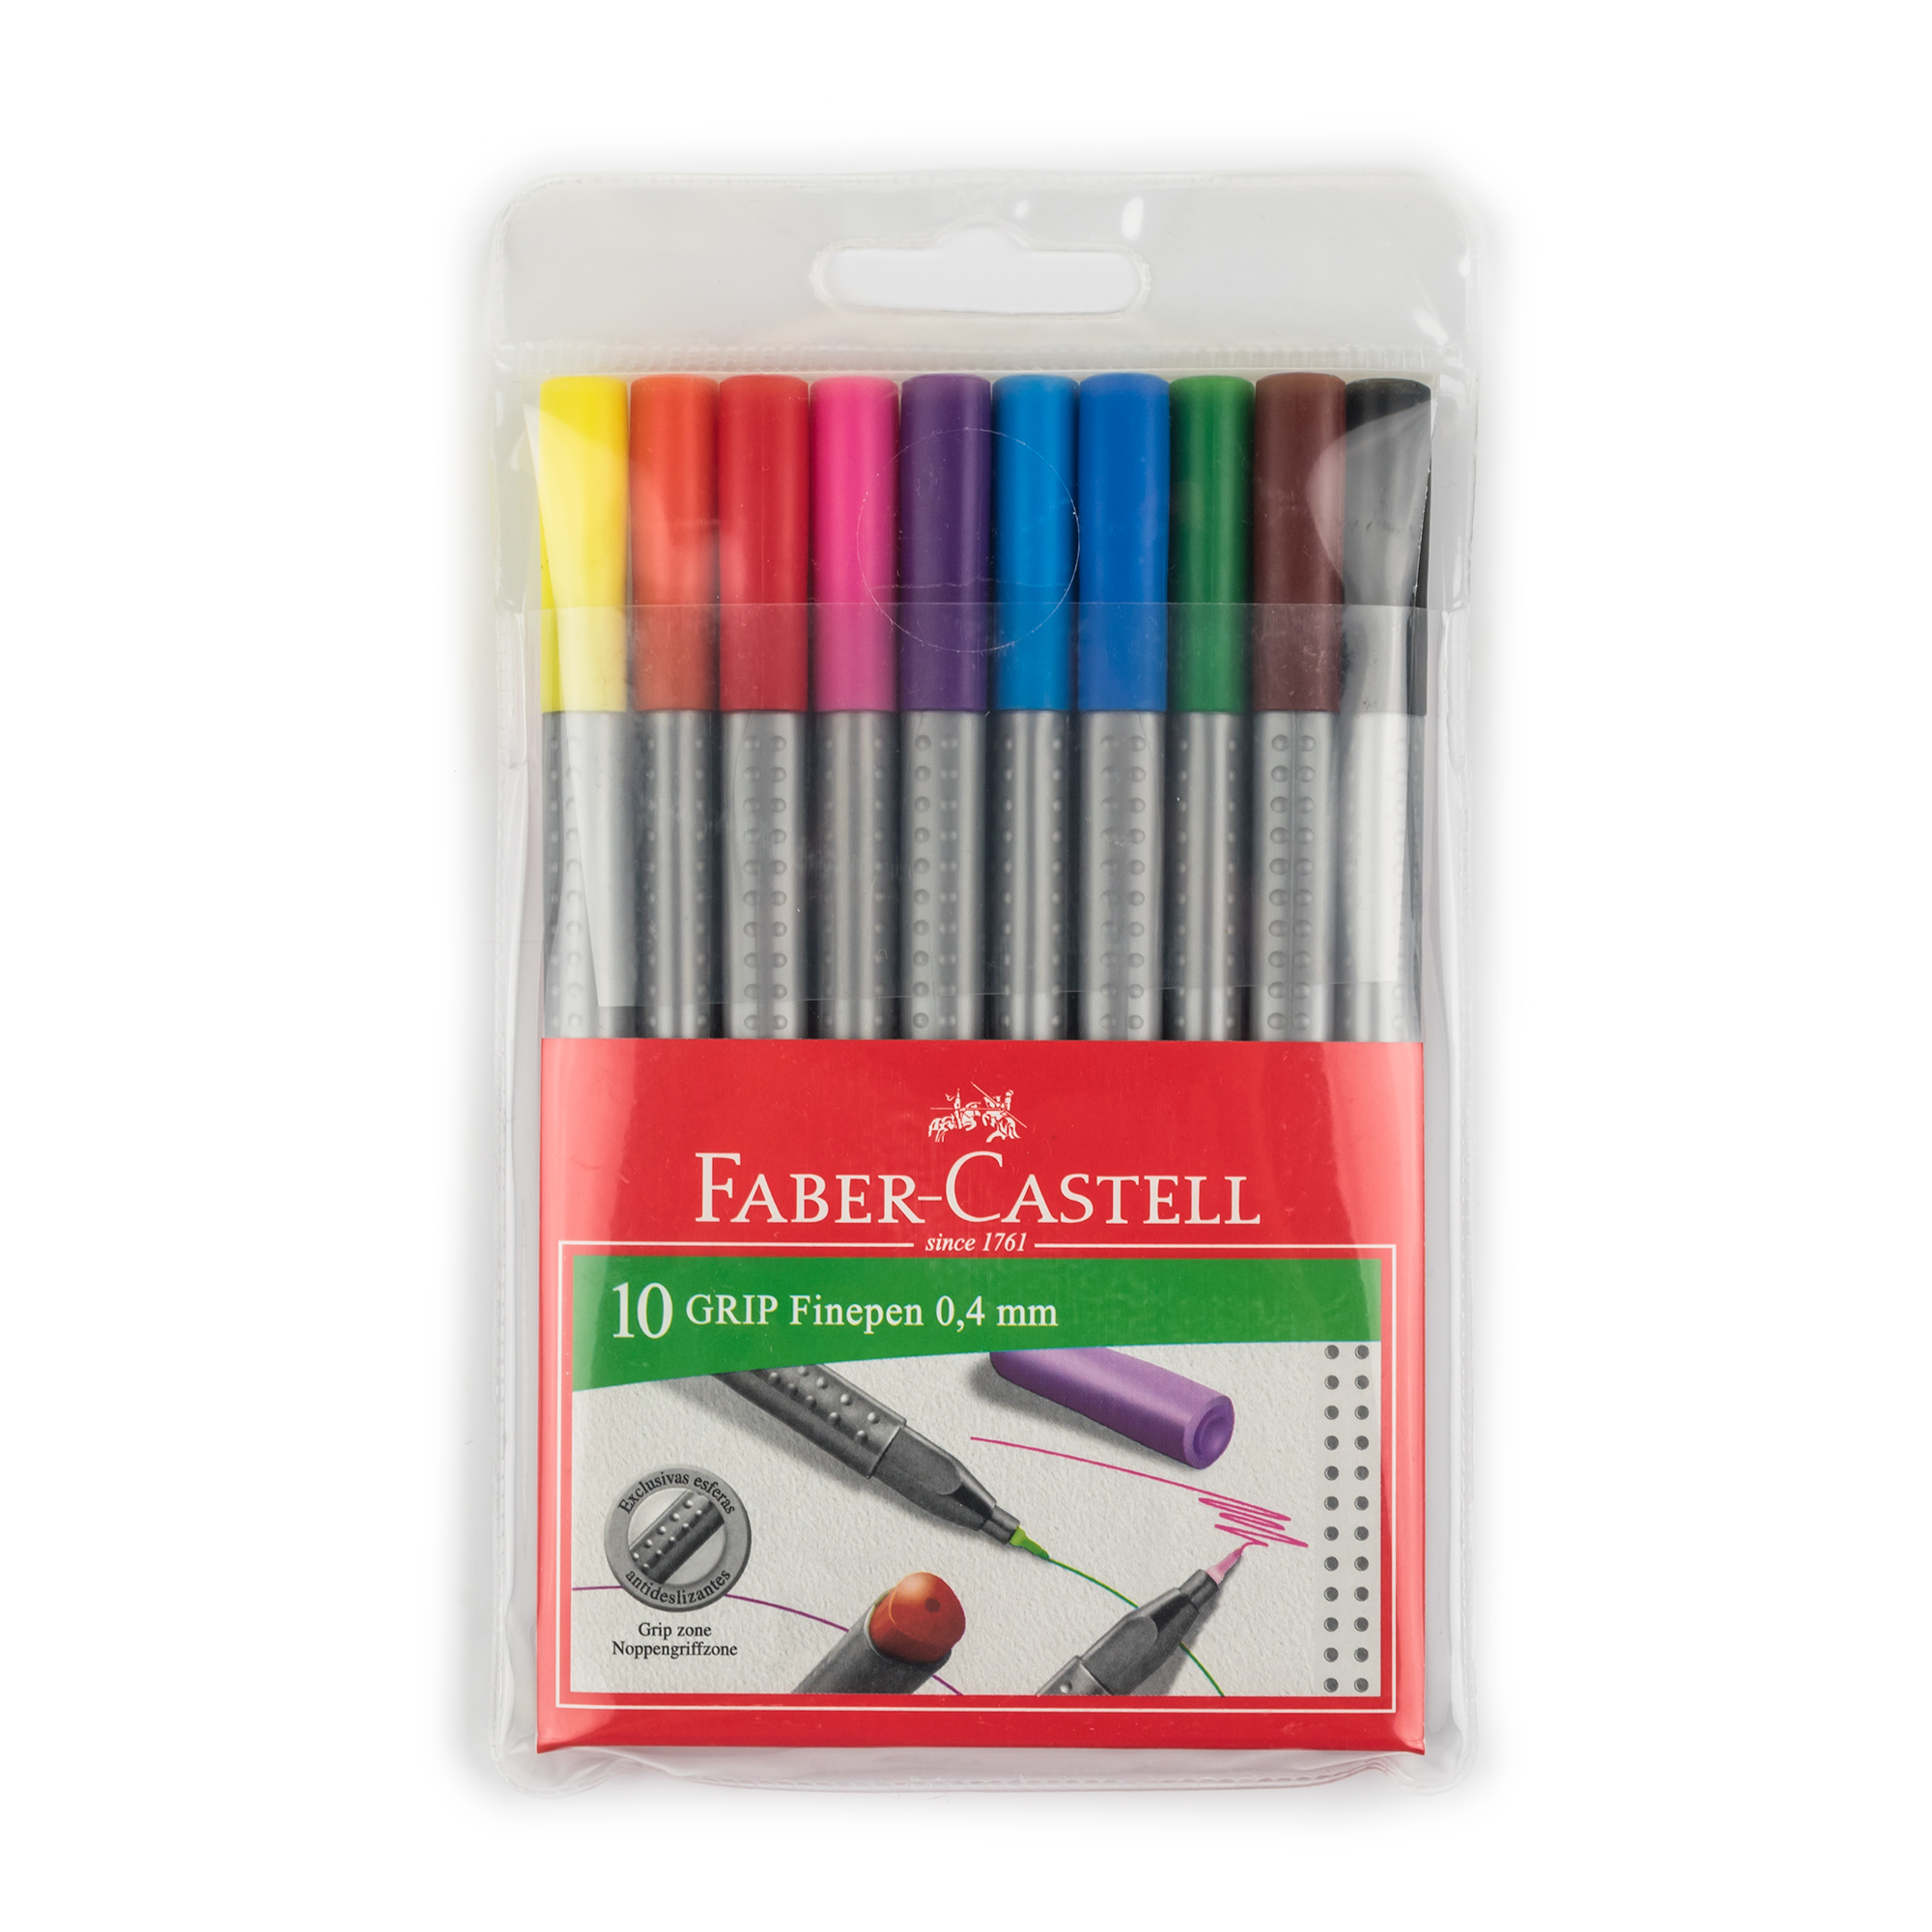 Faber-Castell Grip Finepen 0.4mm 10 colors – Scribe Market